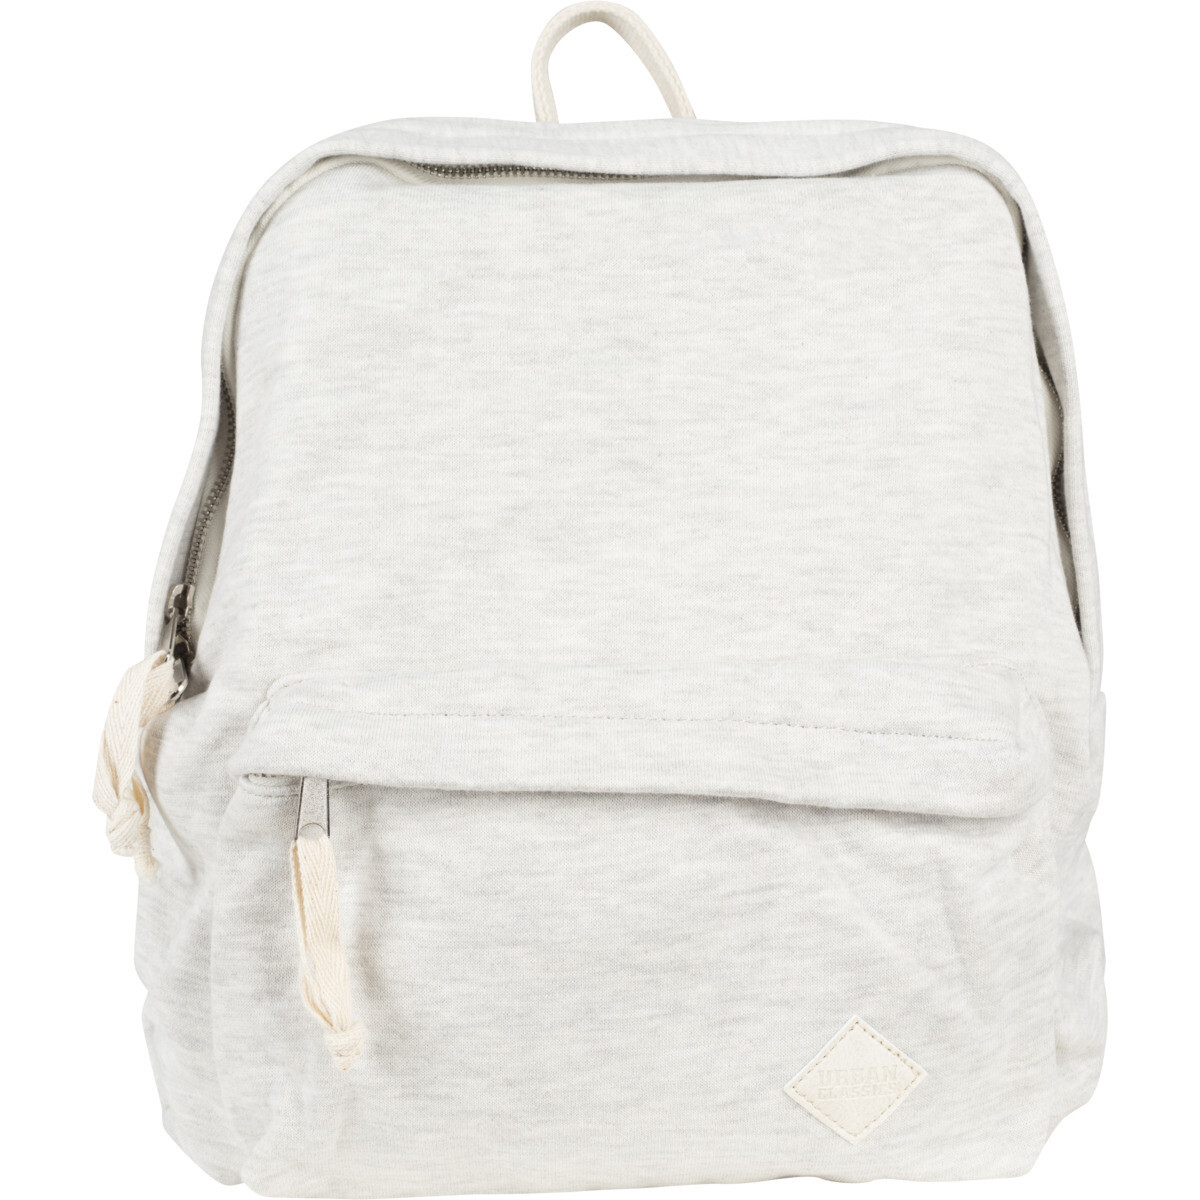 Sweat Backpack - Weiss